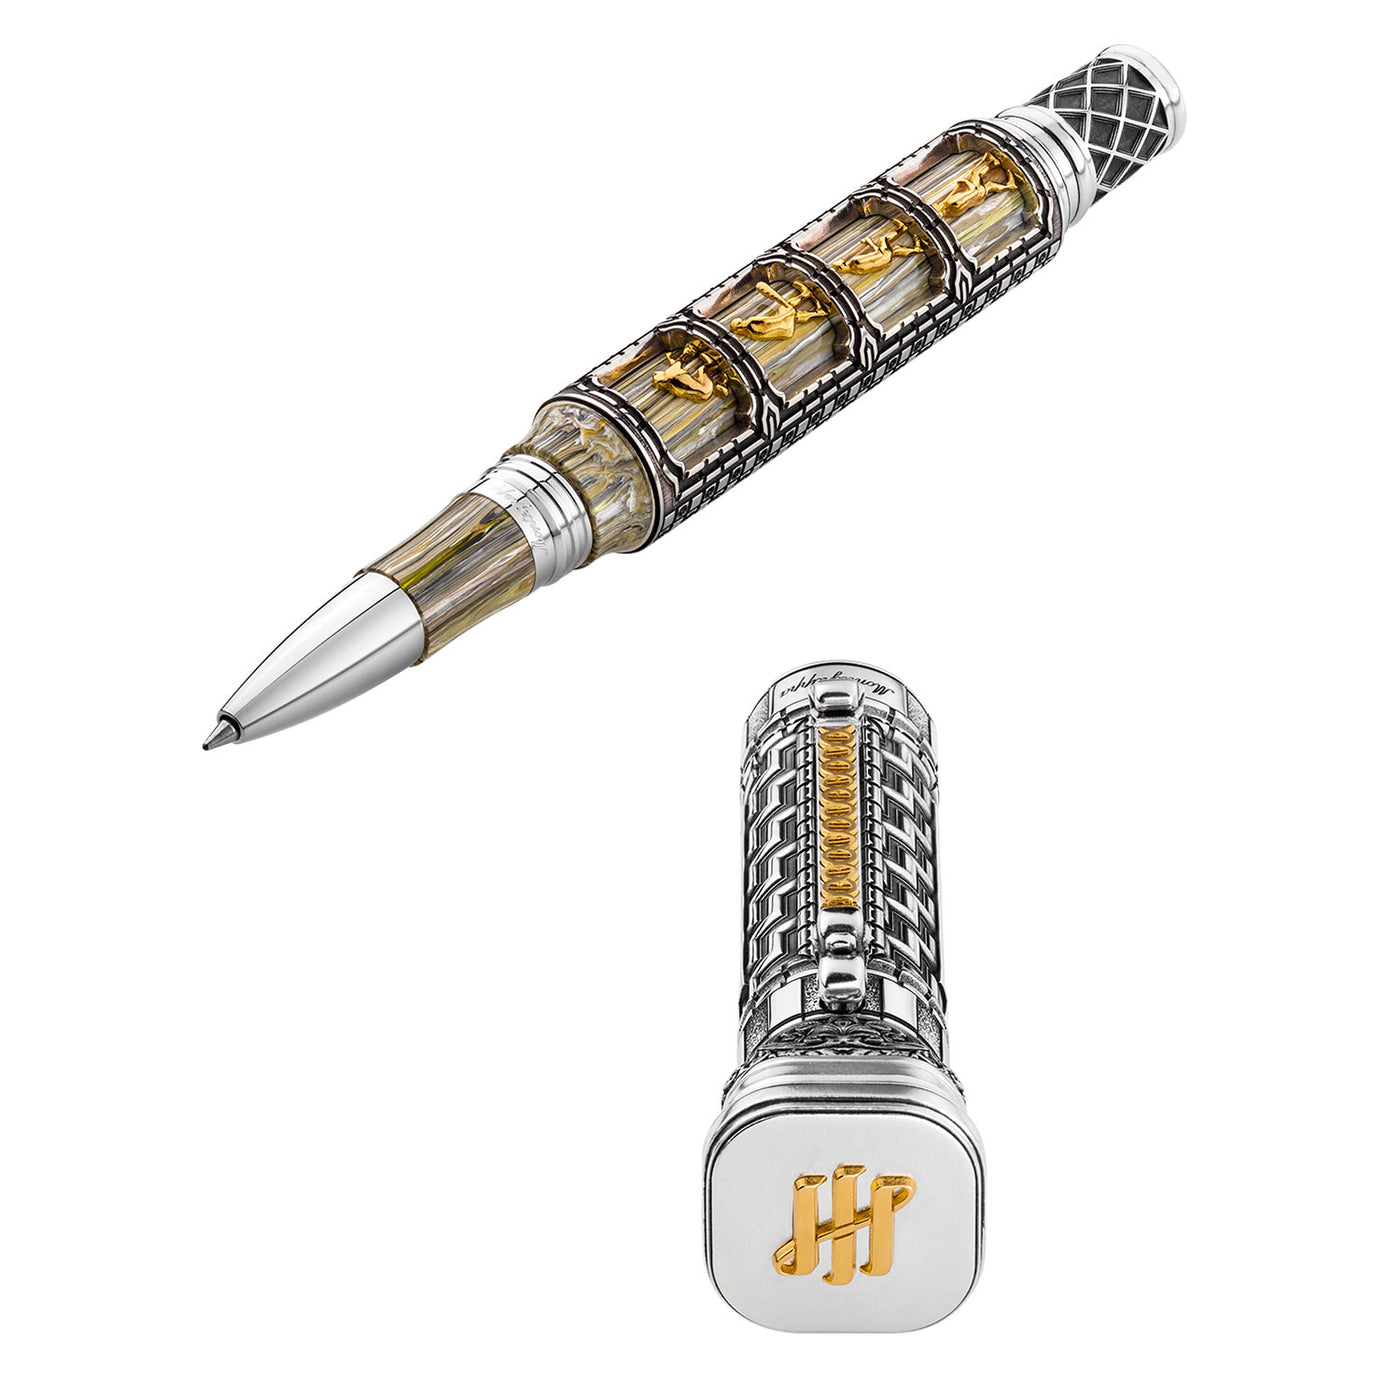 Montegrappa Theory of Evolution Roller Ball Pen - Avanguardia (Limited Edition) 3